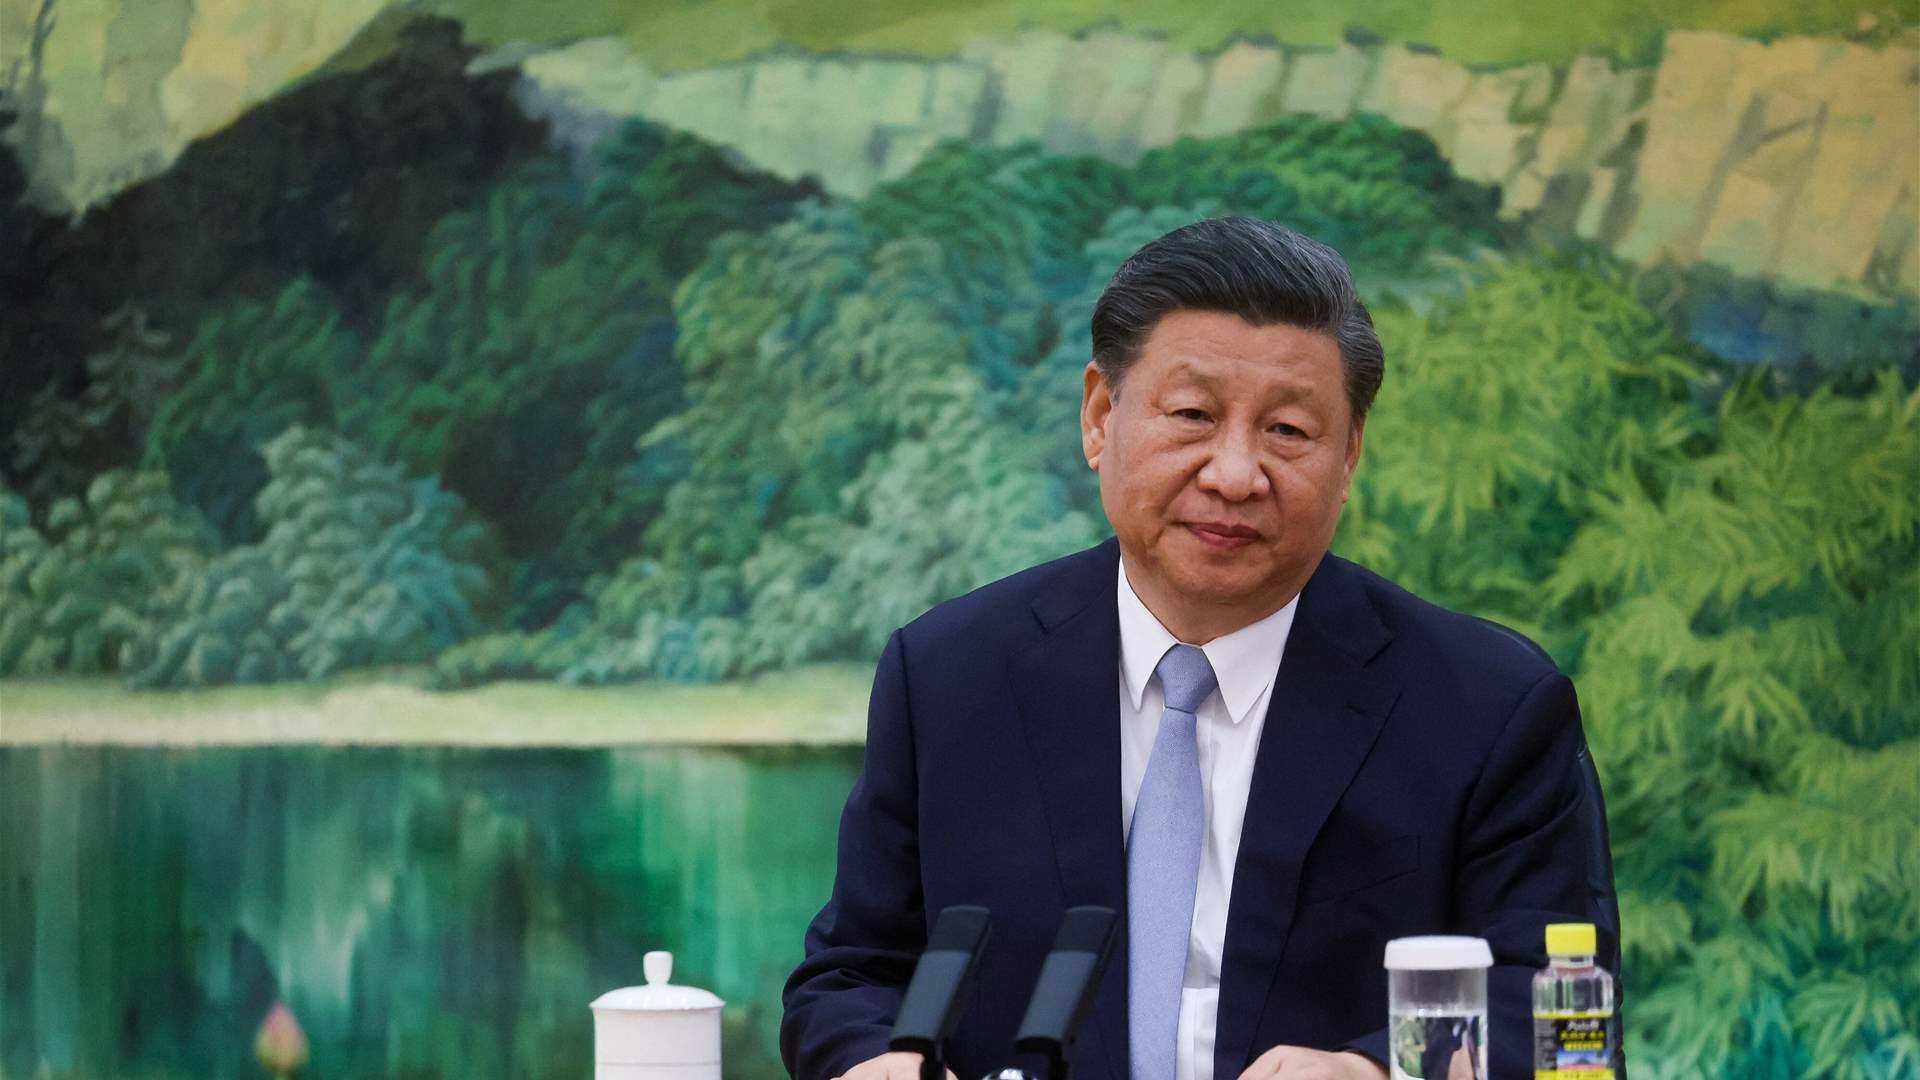 Xi Jinping: China feels &#39;deeply distressed&#39; by the &#39;very grave&#39; humanitarian situation in Gaza